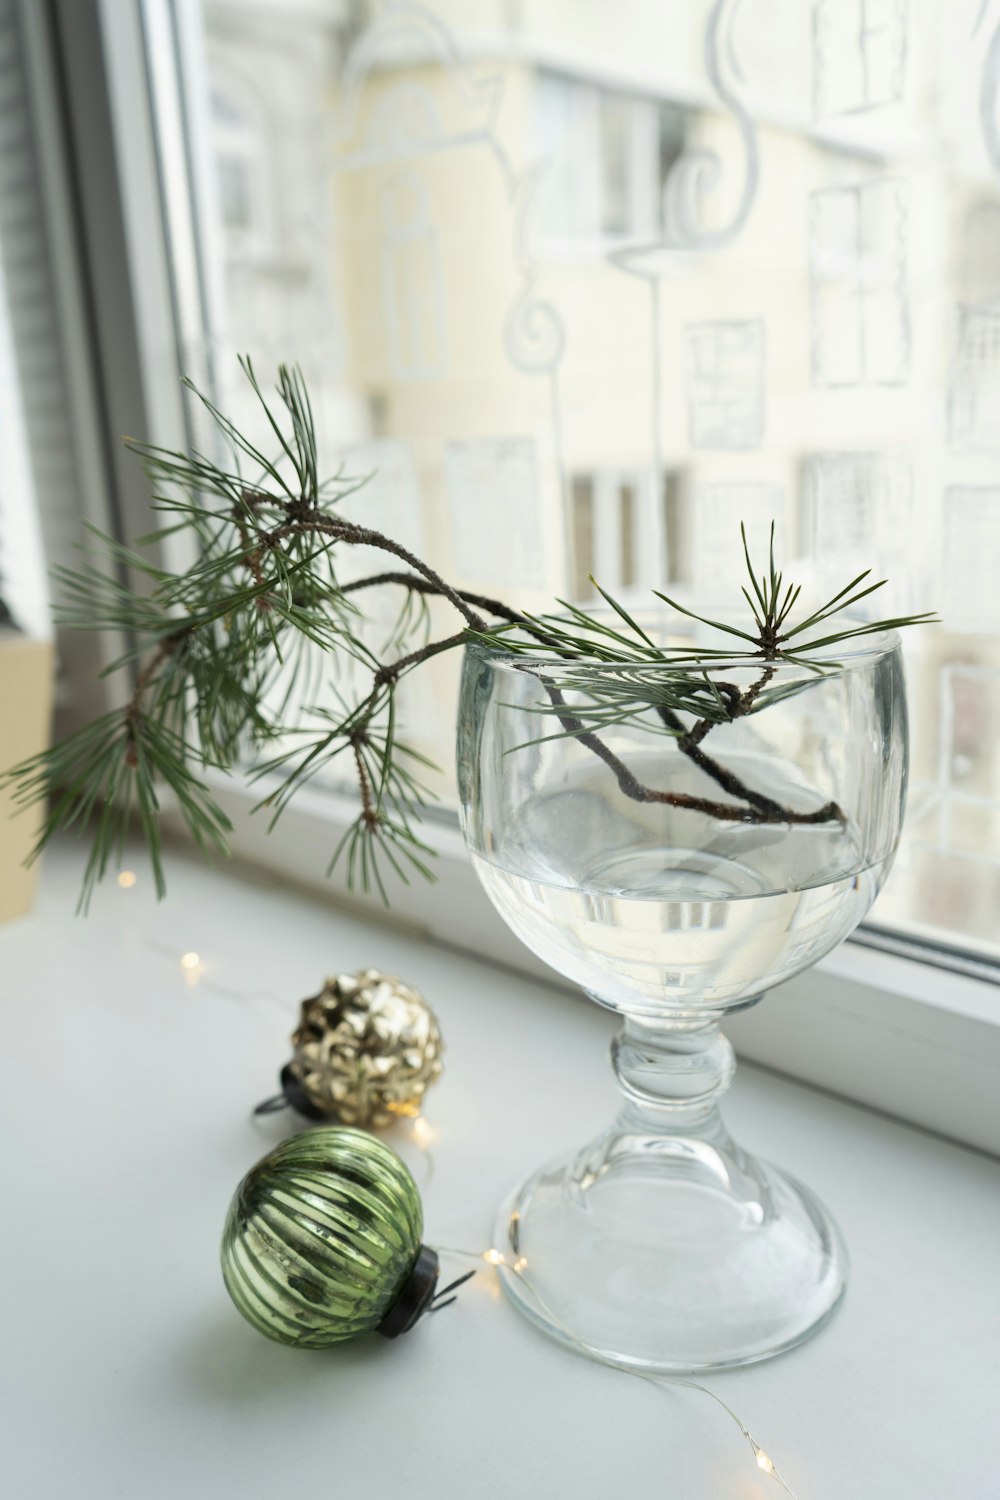 a glass of water and a pine branch on a window sill